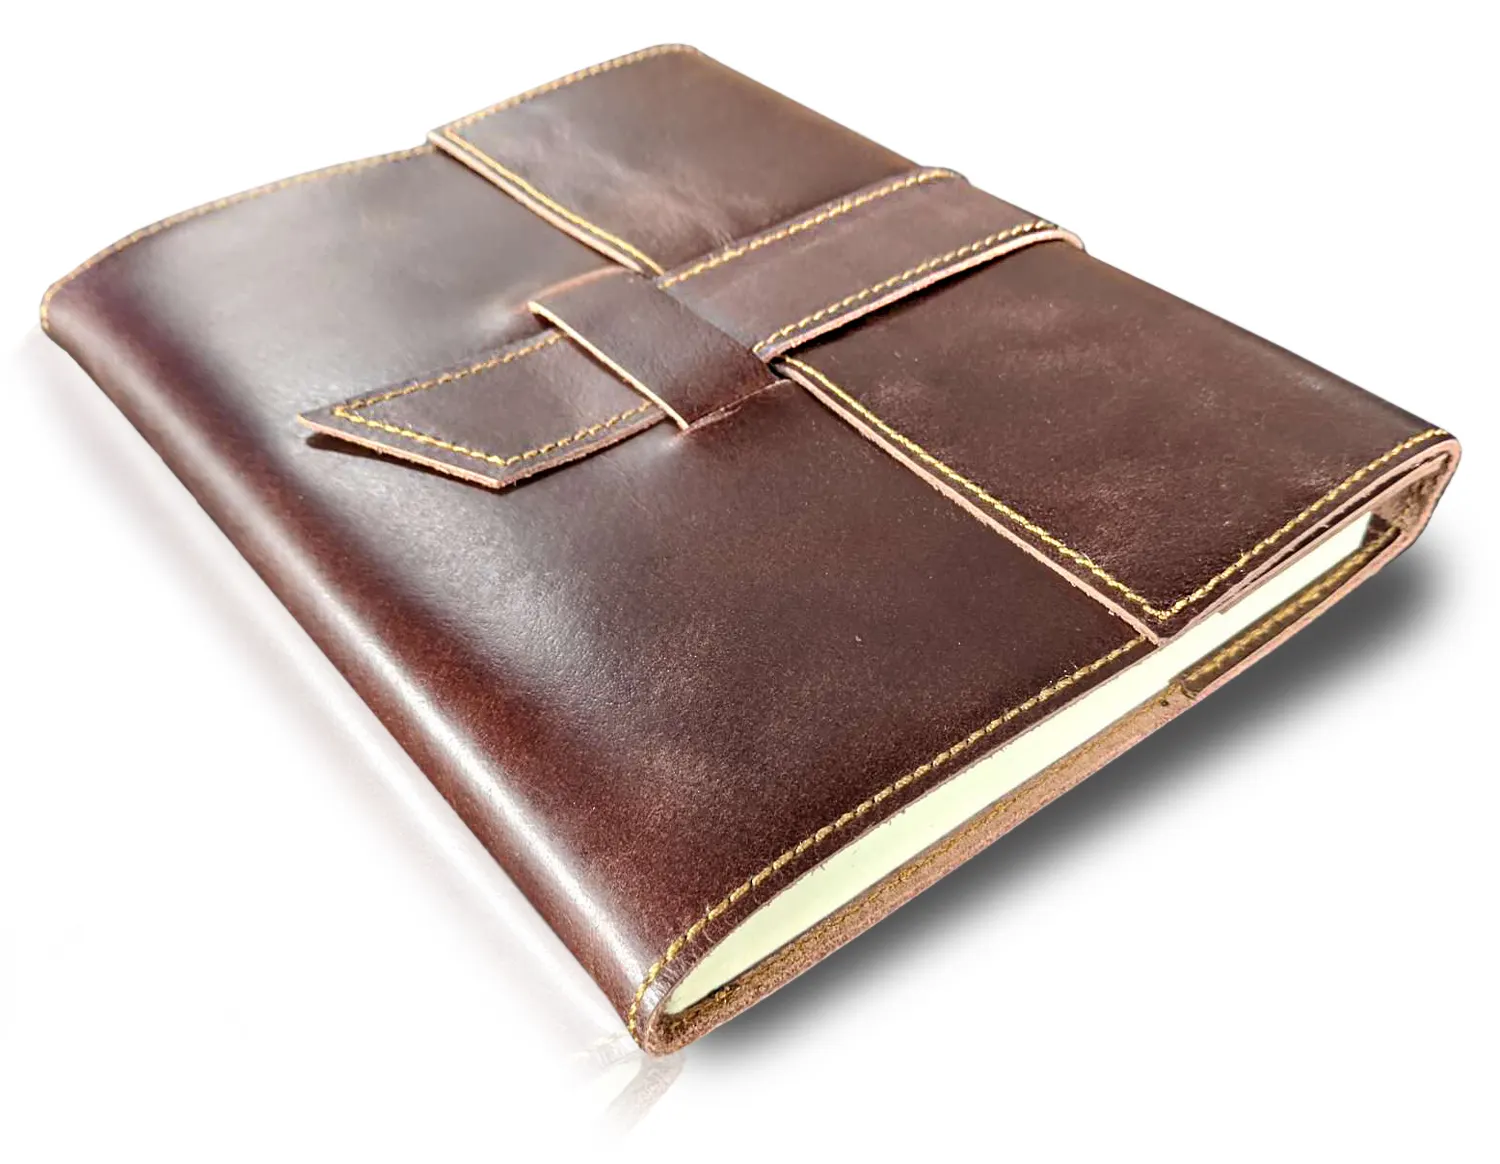 Vintage Leather Journal with Lined Pages A5 Refillable Writing Ruled Notebook Handcrafted Travel Diary Gift for Men and Women